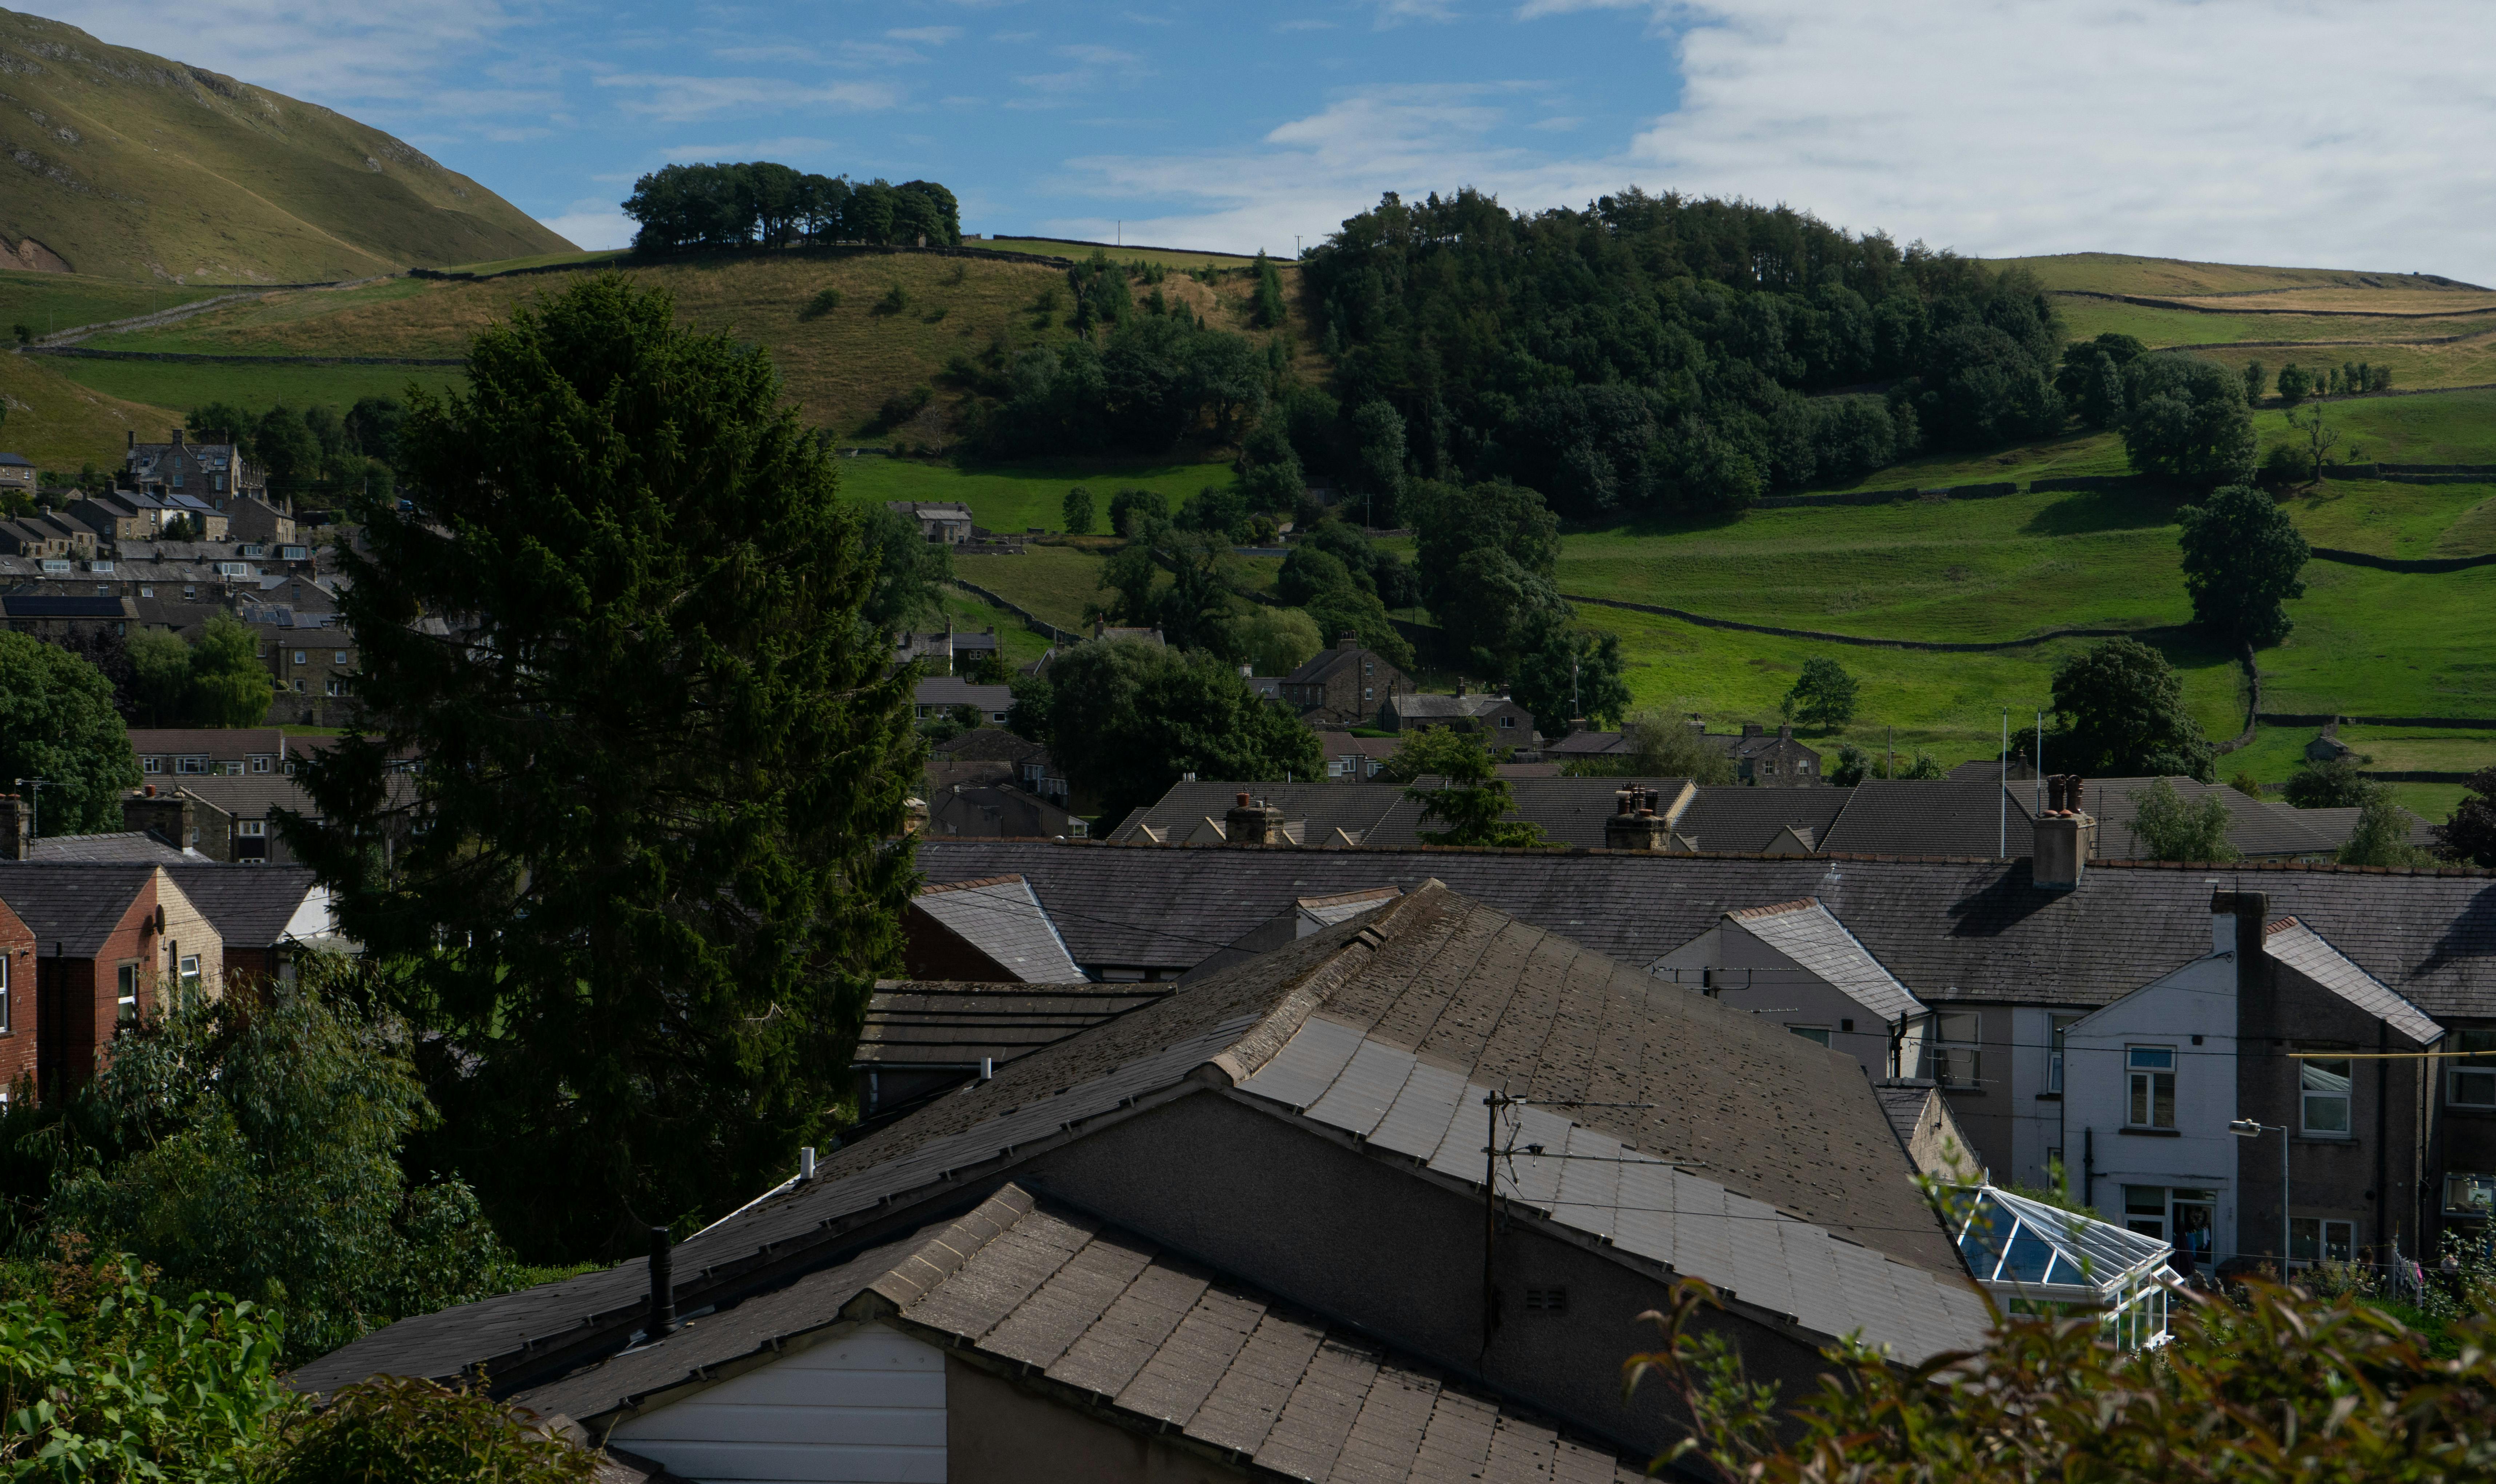 Roofs of houses in Settle